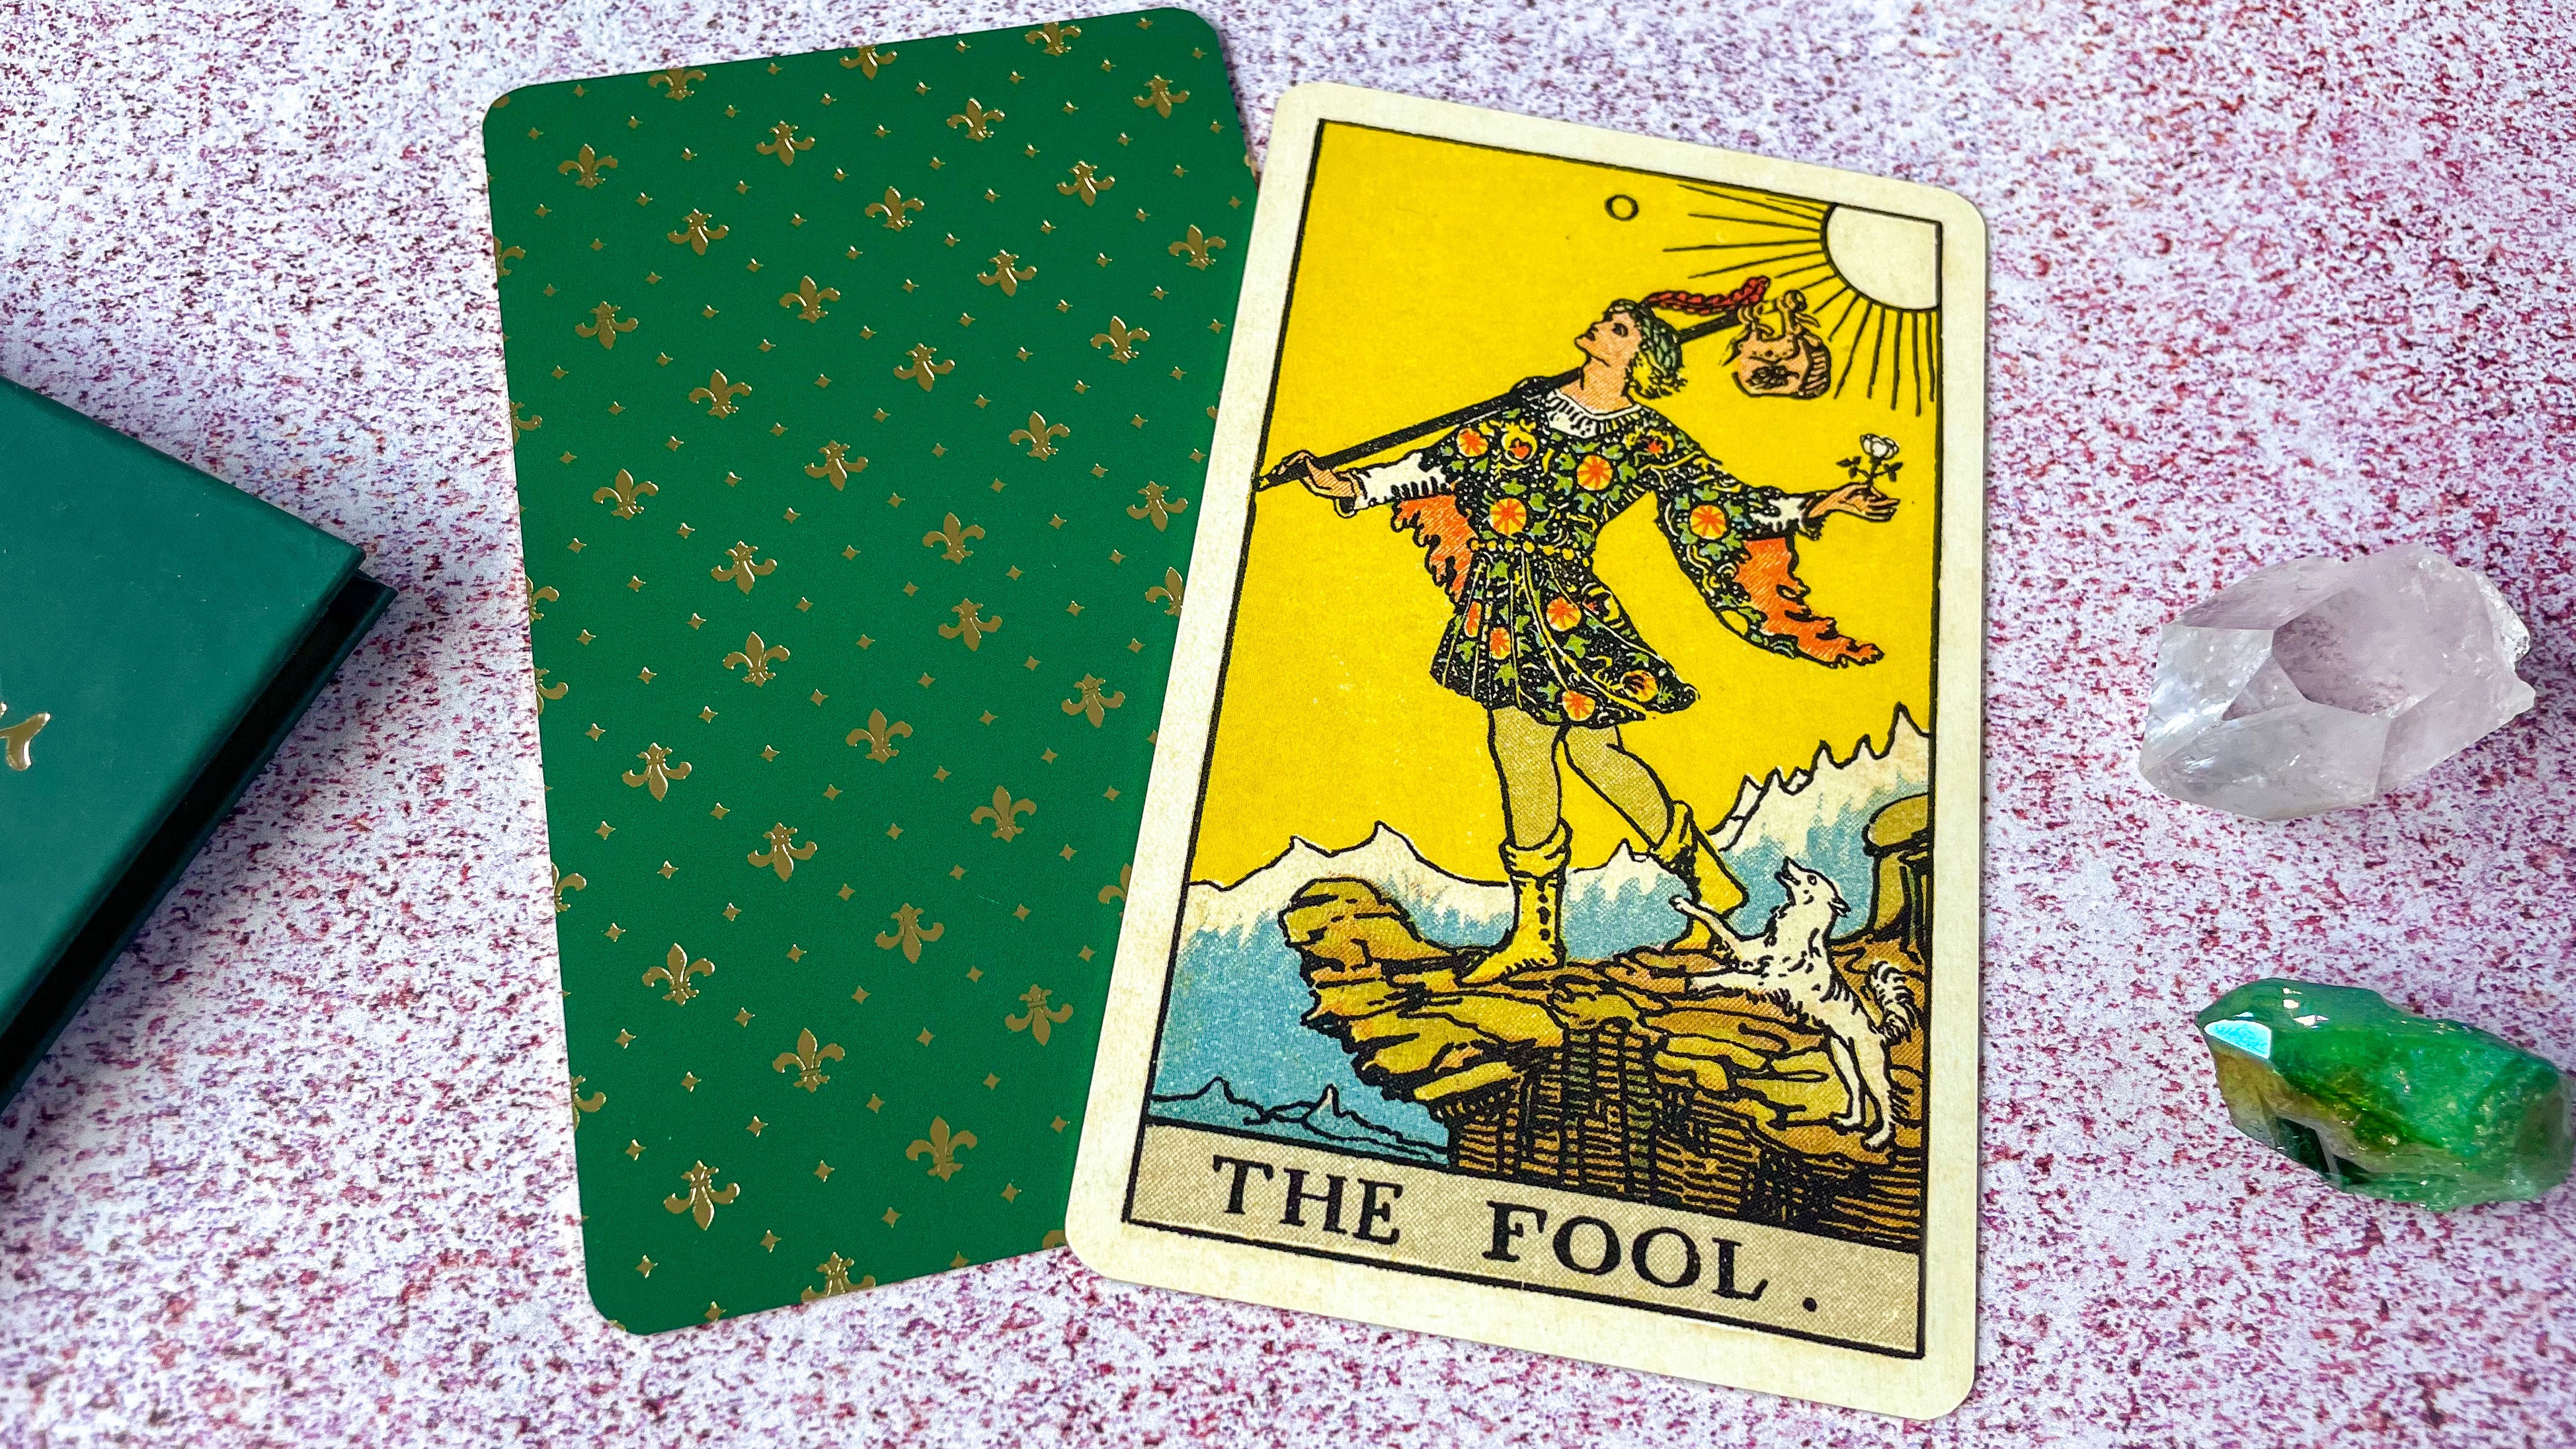 The Fool from the Rider Waite Tarot is displayed on top of the back of a green tarot card.